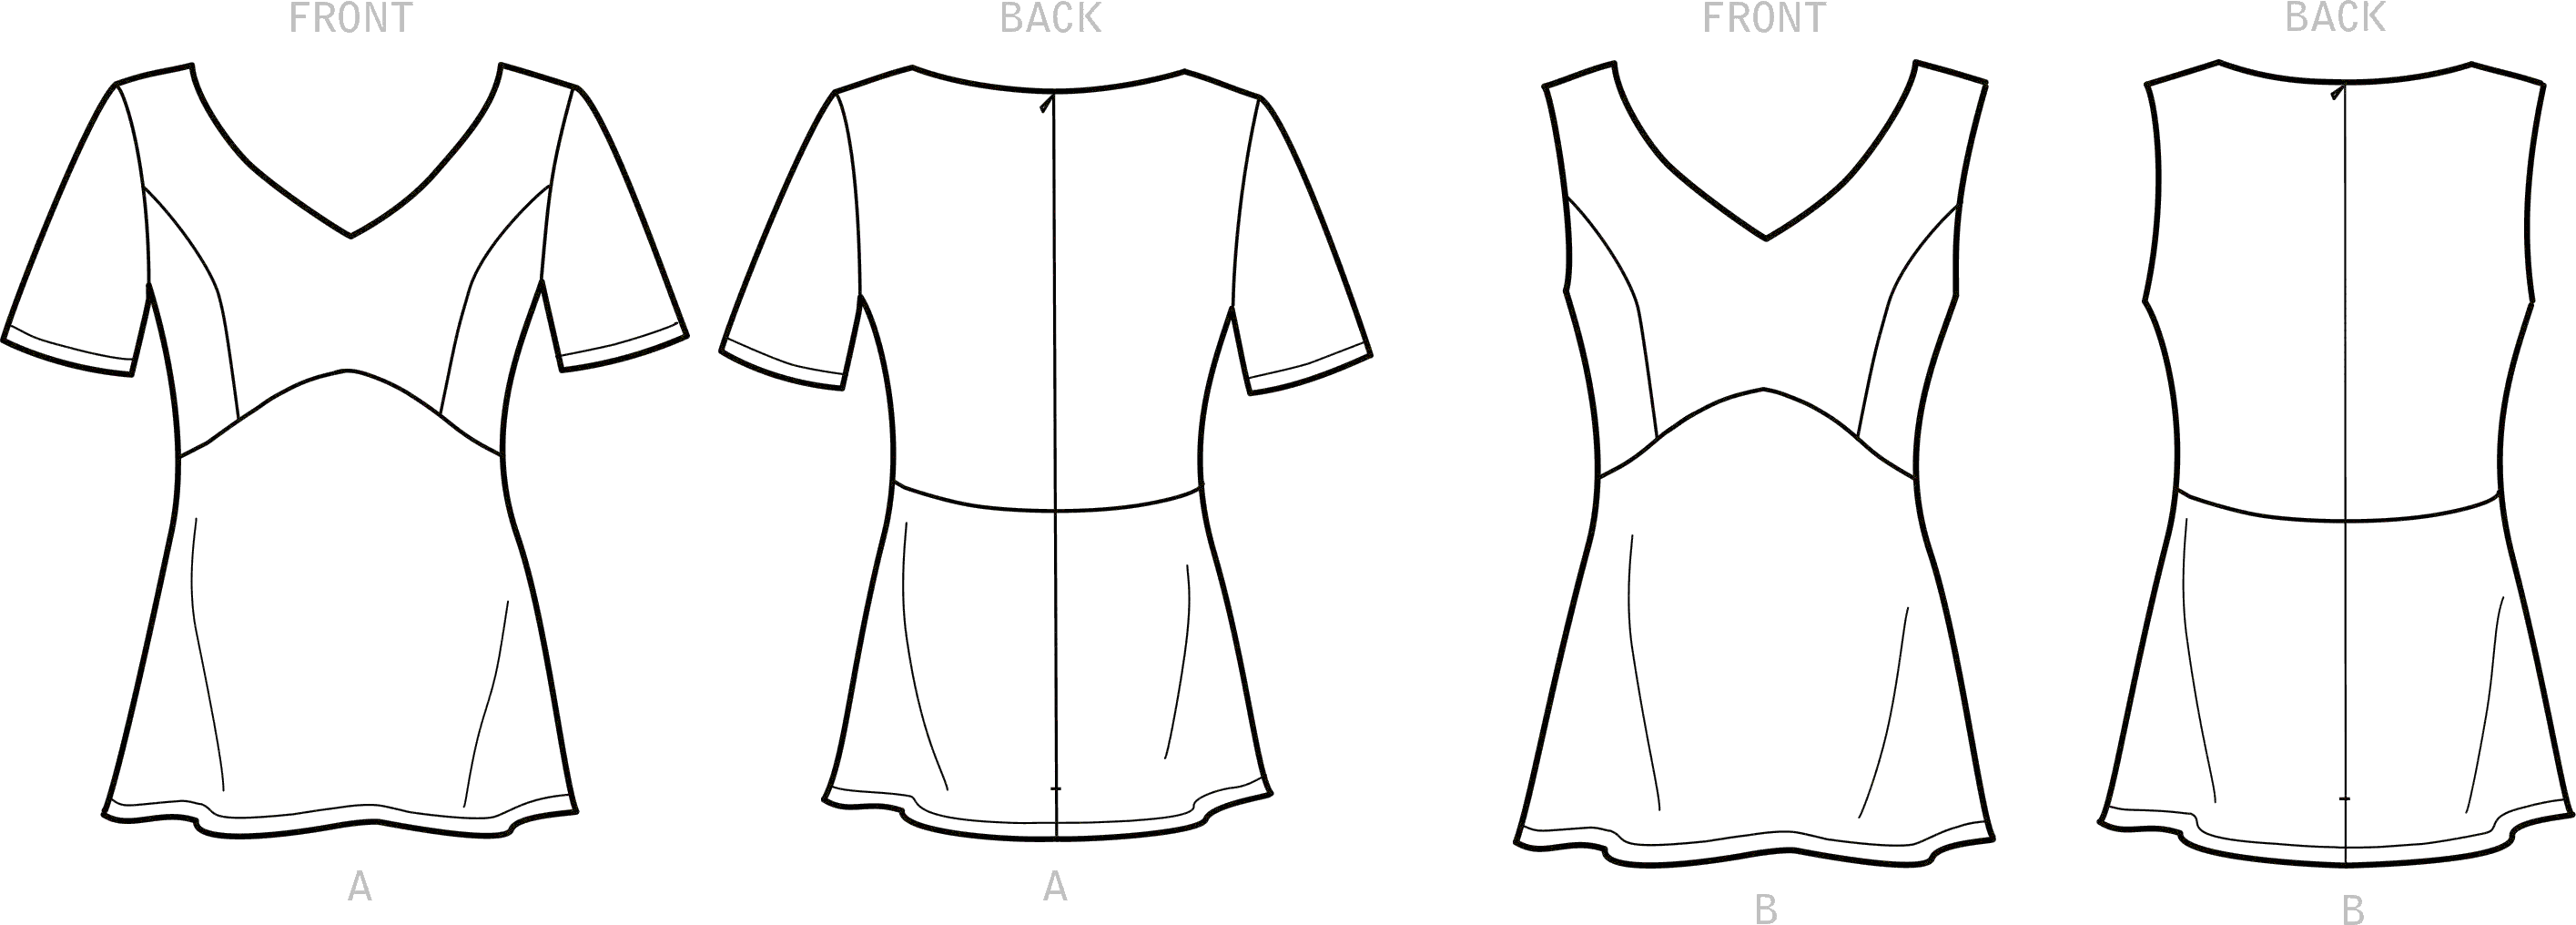 New Look Sewing Pattern N6673 Misses Tops 6673 Line Art From Patternsandplains.com